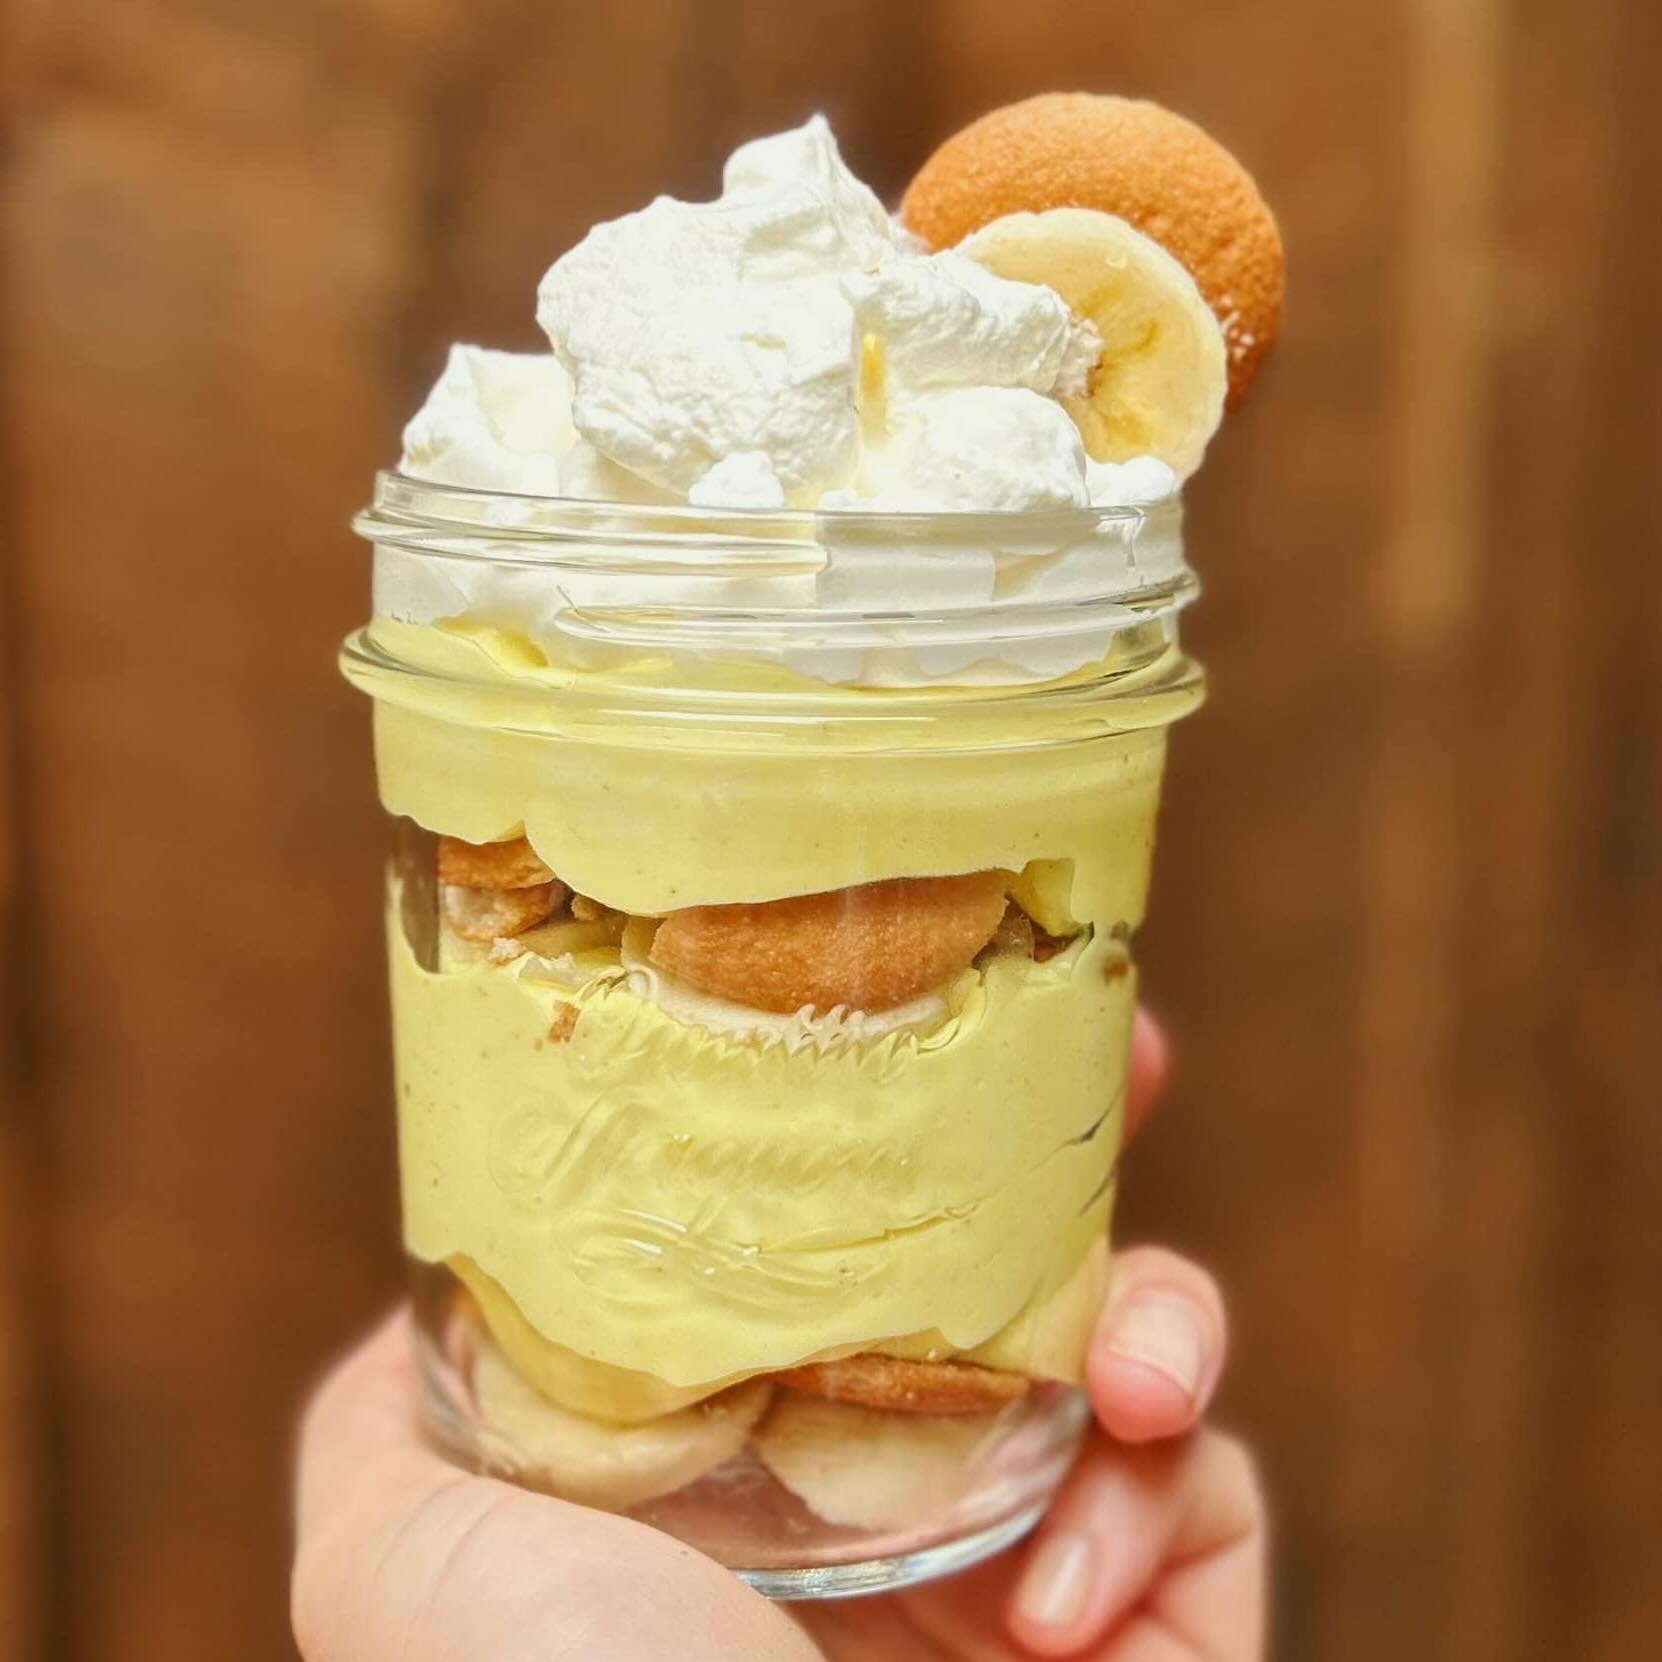 🍌🍌🍌Hey puddin&rsquo; 👋🏼 we&rsquo;ve whipped up something very special that we know you&rsquo;ll go bananas for! 
Come give it a try Friday and Saturday in Ponca, or order a batch from our Vacaytering menu! 🍌🍌🍌

#buffalonationalriver #arkansas